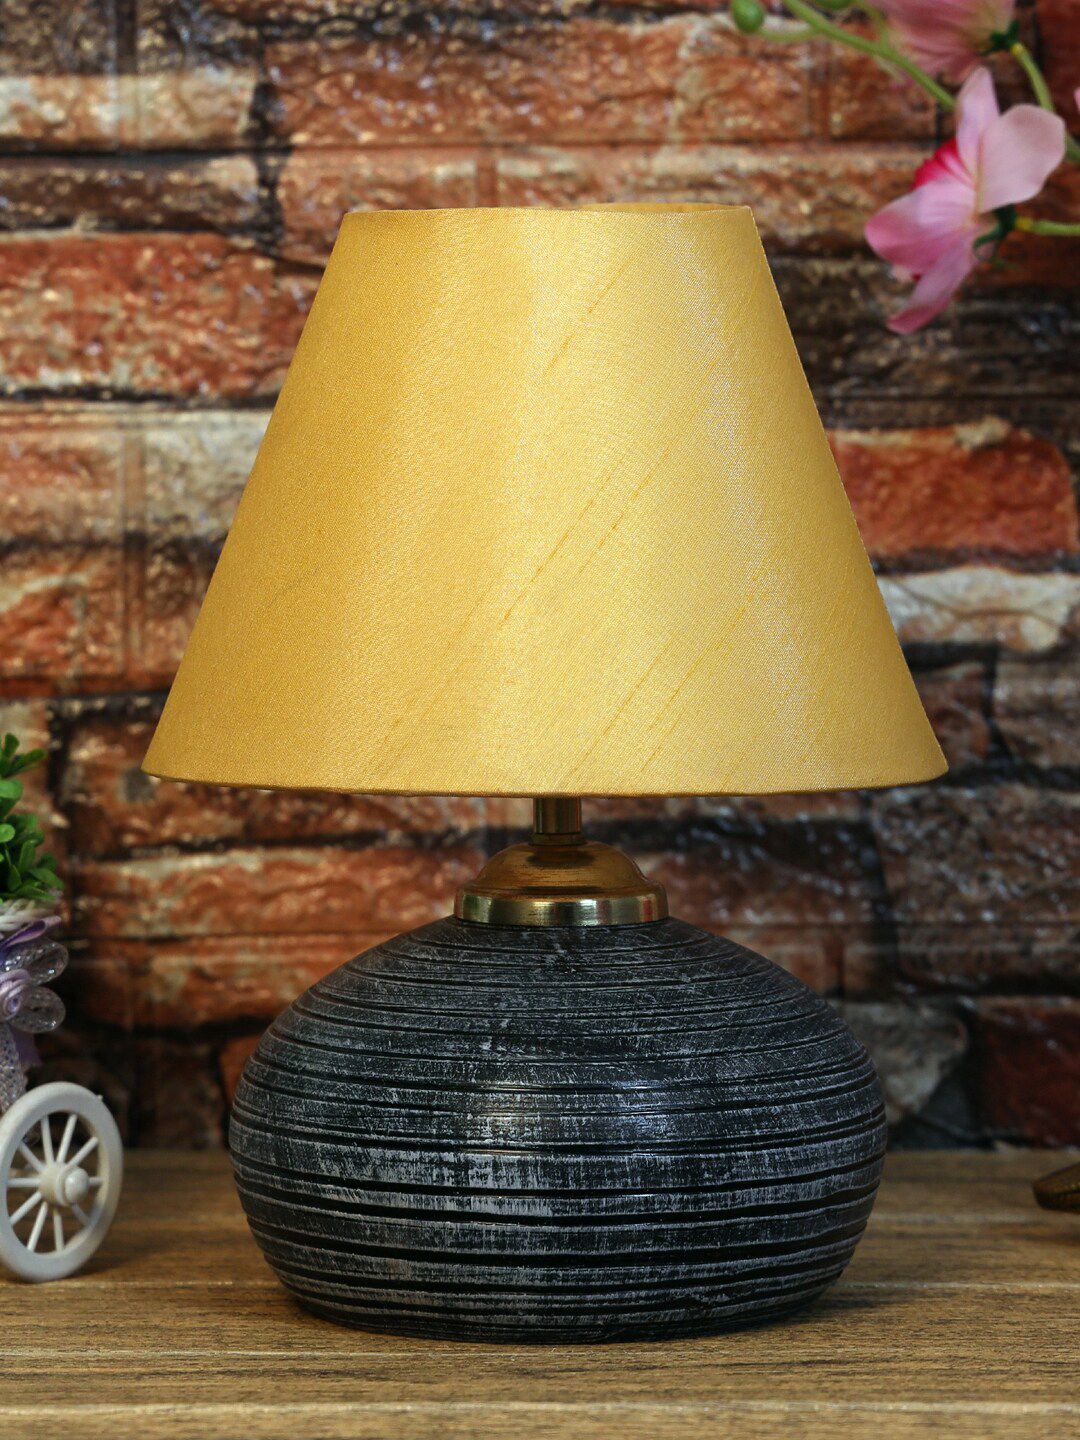 foziq Black & Gold-Toned Textured Table Lamps Price in India